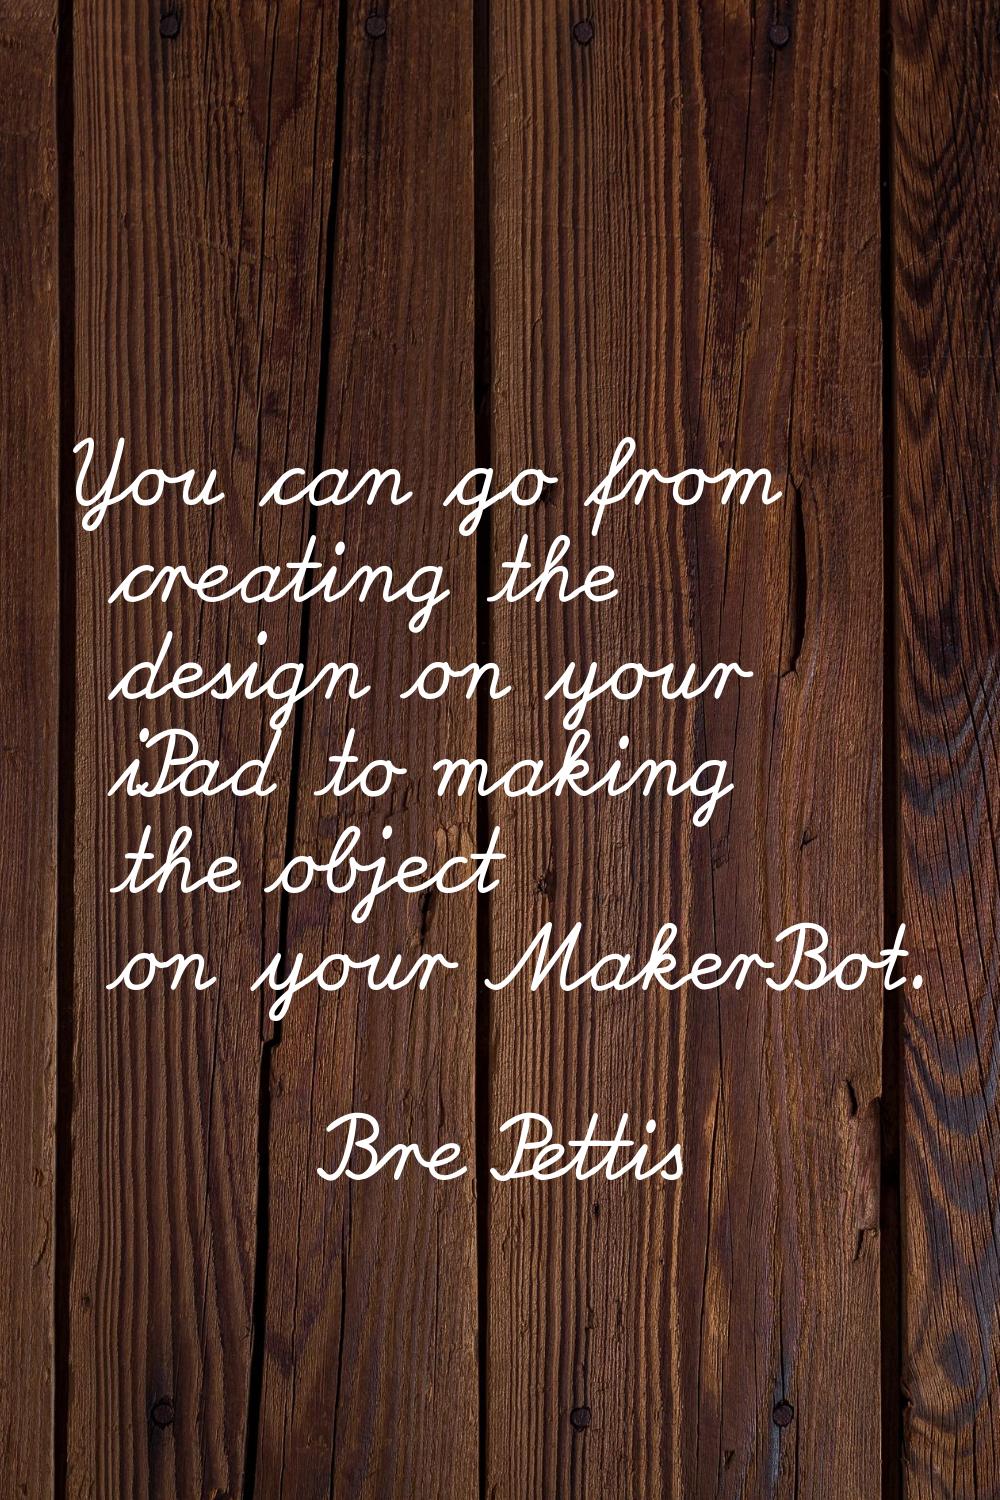 You can go from creating the design on your iPad to making the object on your MakerBot.